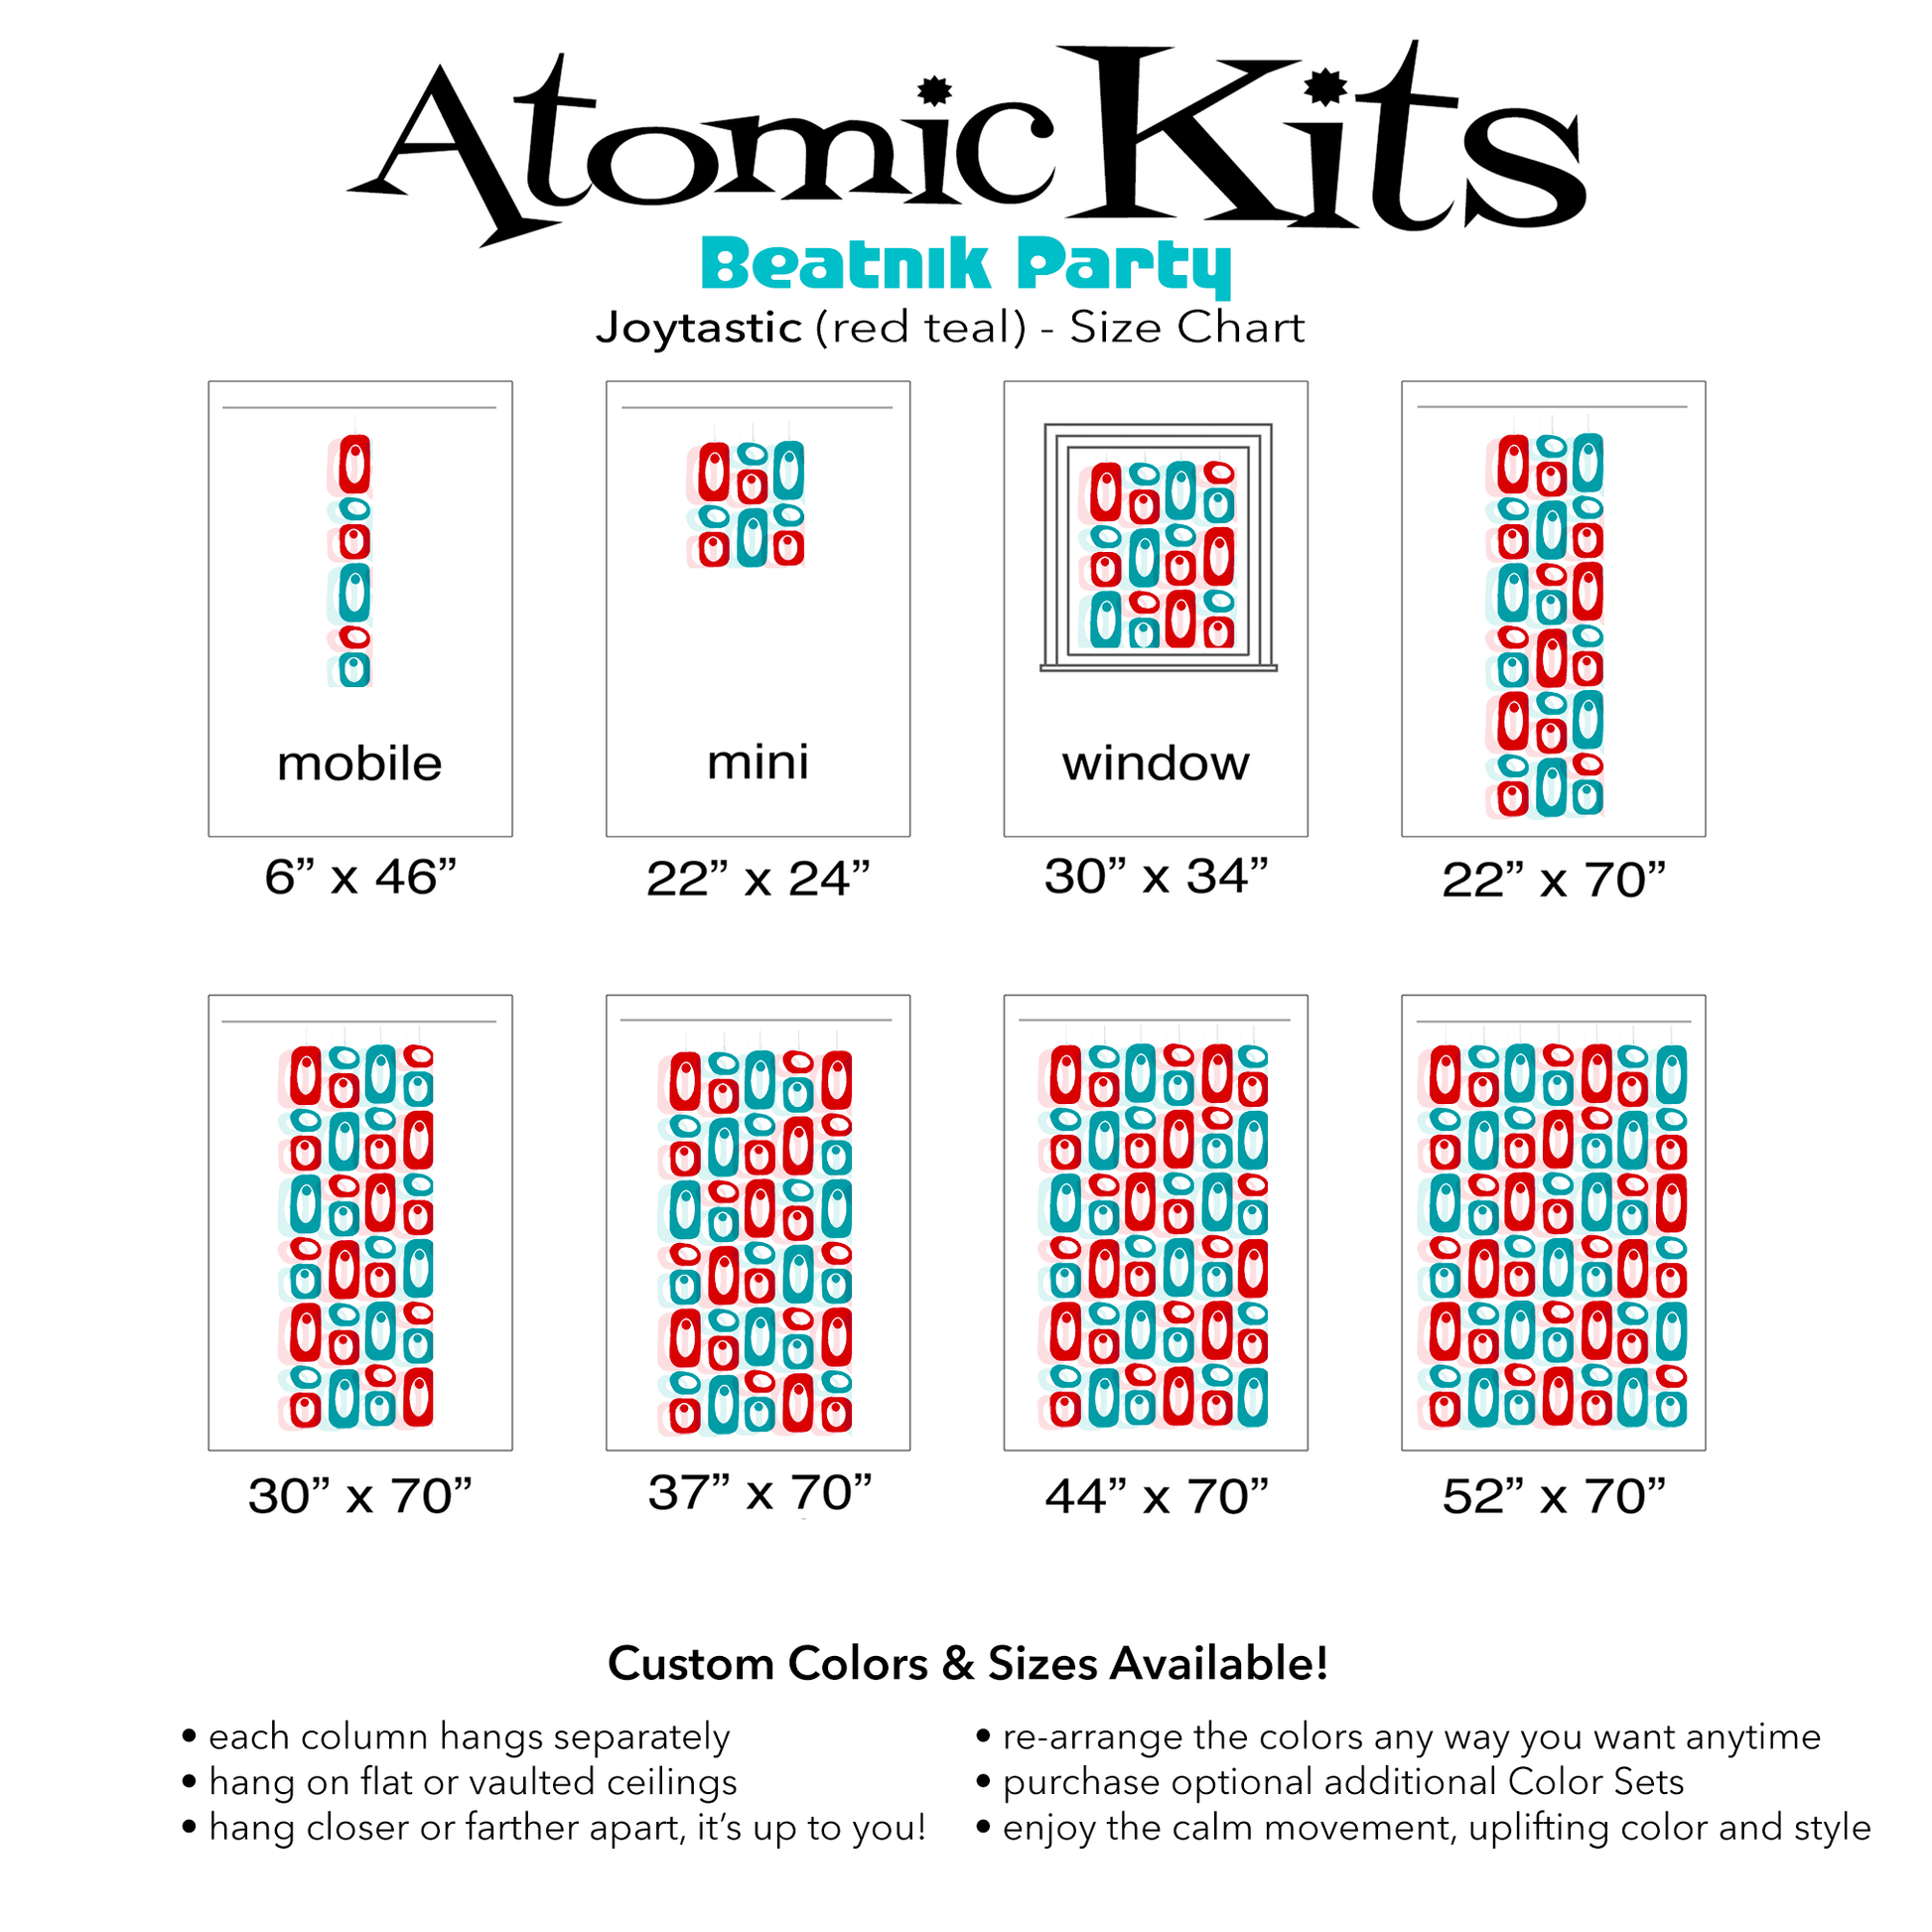 Size Chart for Gorgeous red and teal plexiglass acrylic DIY Atomic Kits - Mid Century Modern style hanging art mobiles, curtains, room dividers, screens by AtomicMobiles.com